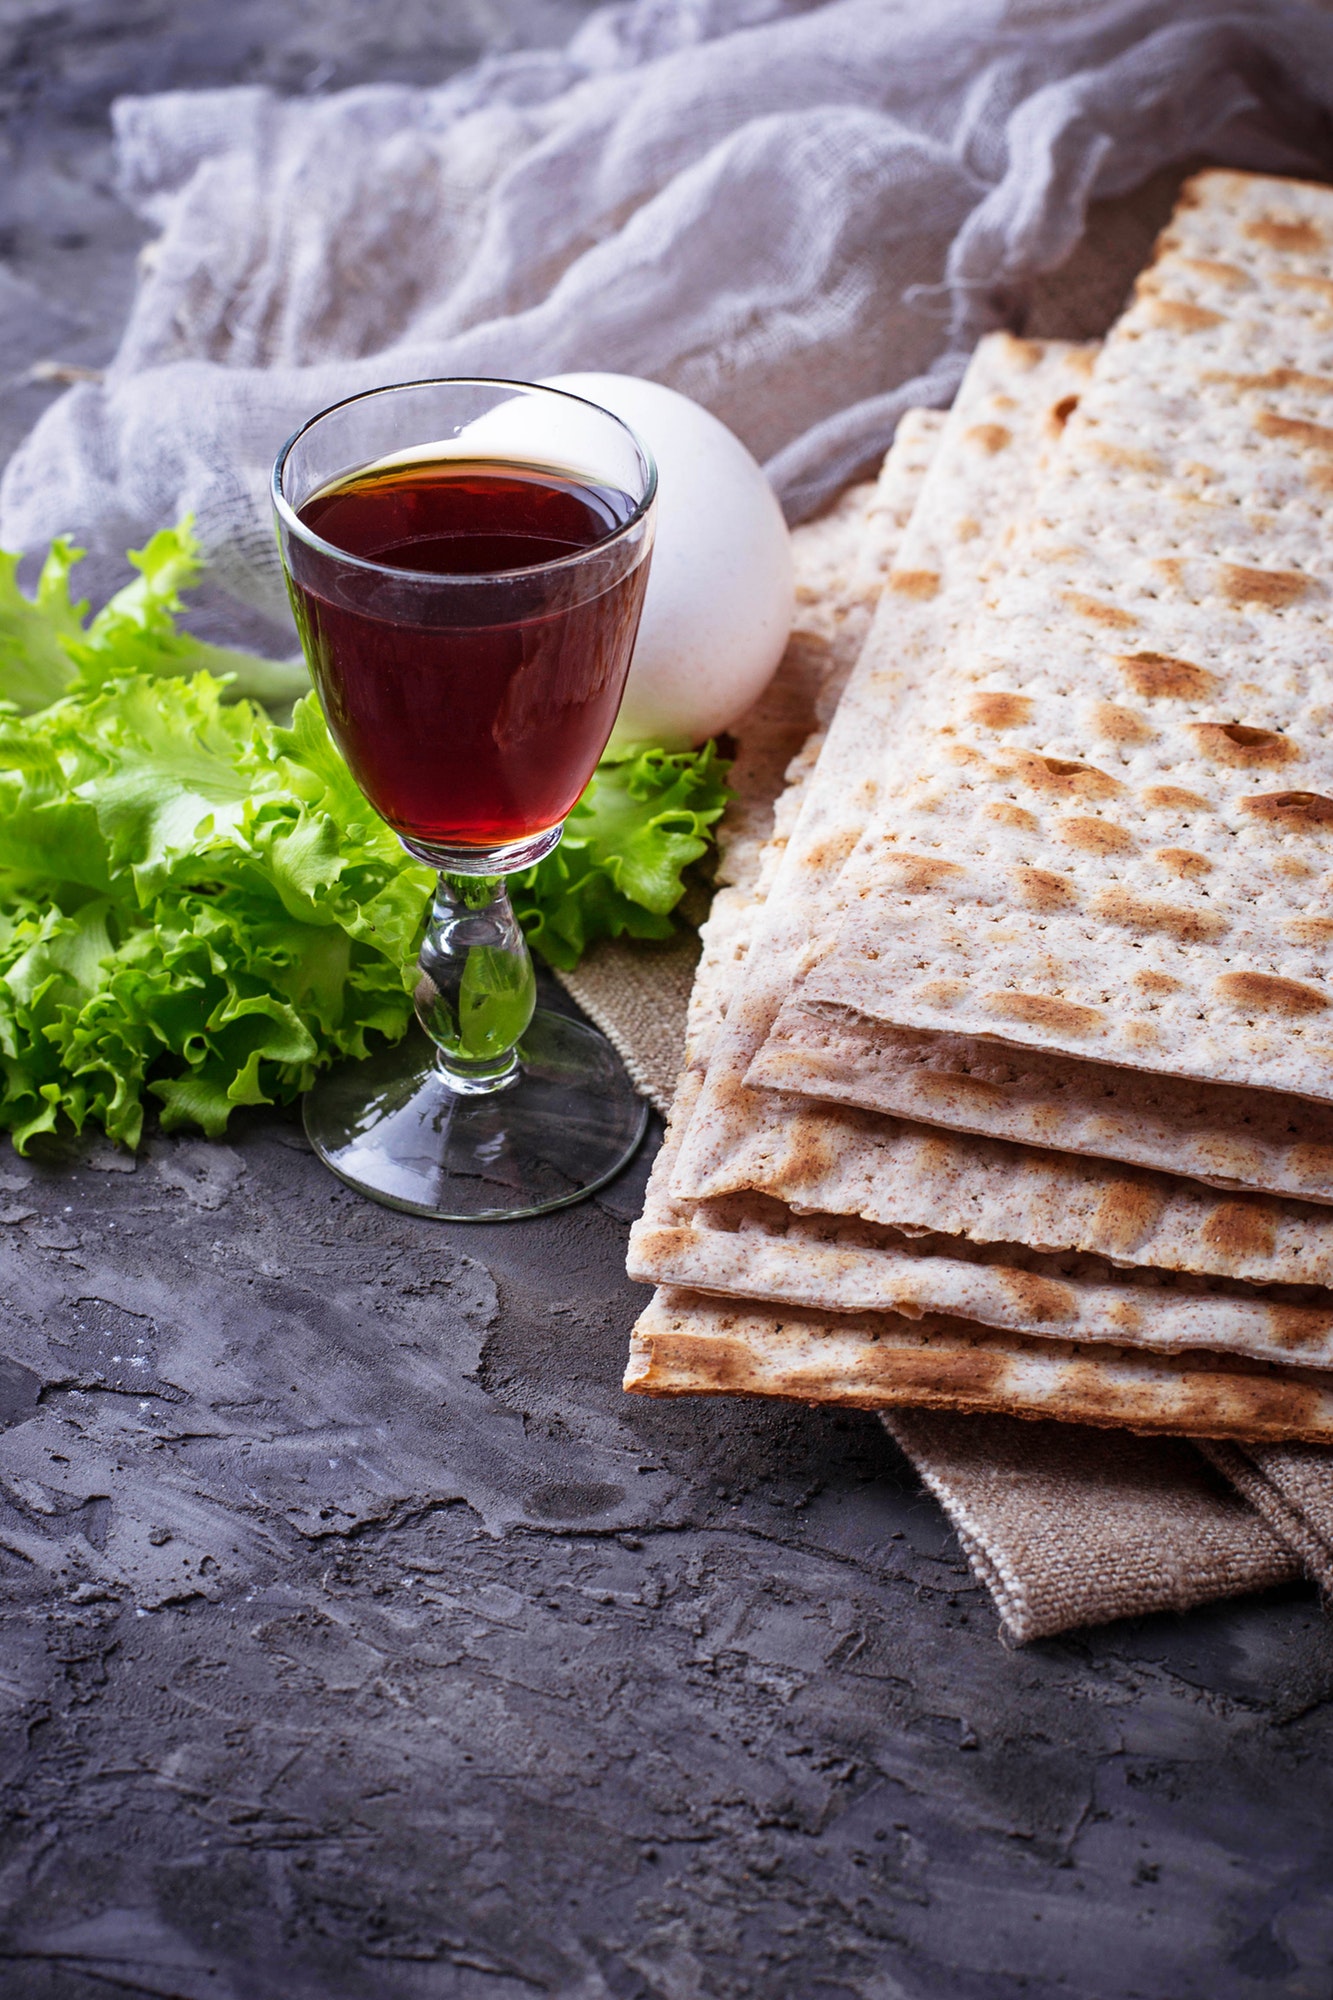 Concept of traditional Jewish celebration Passover seder